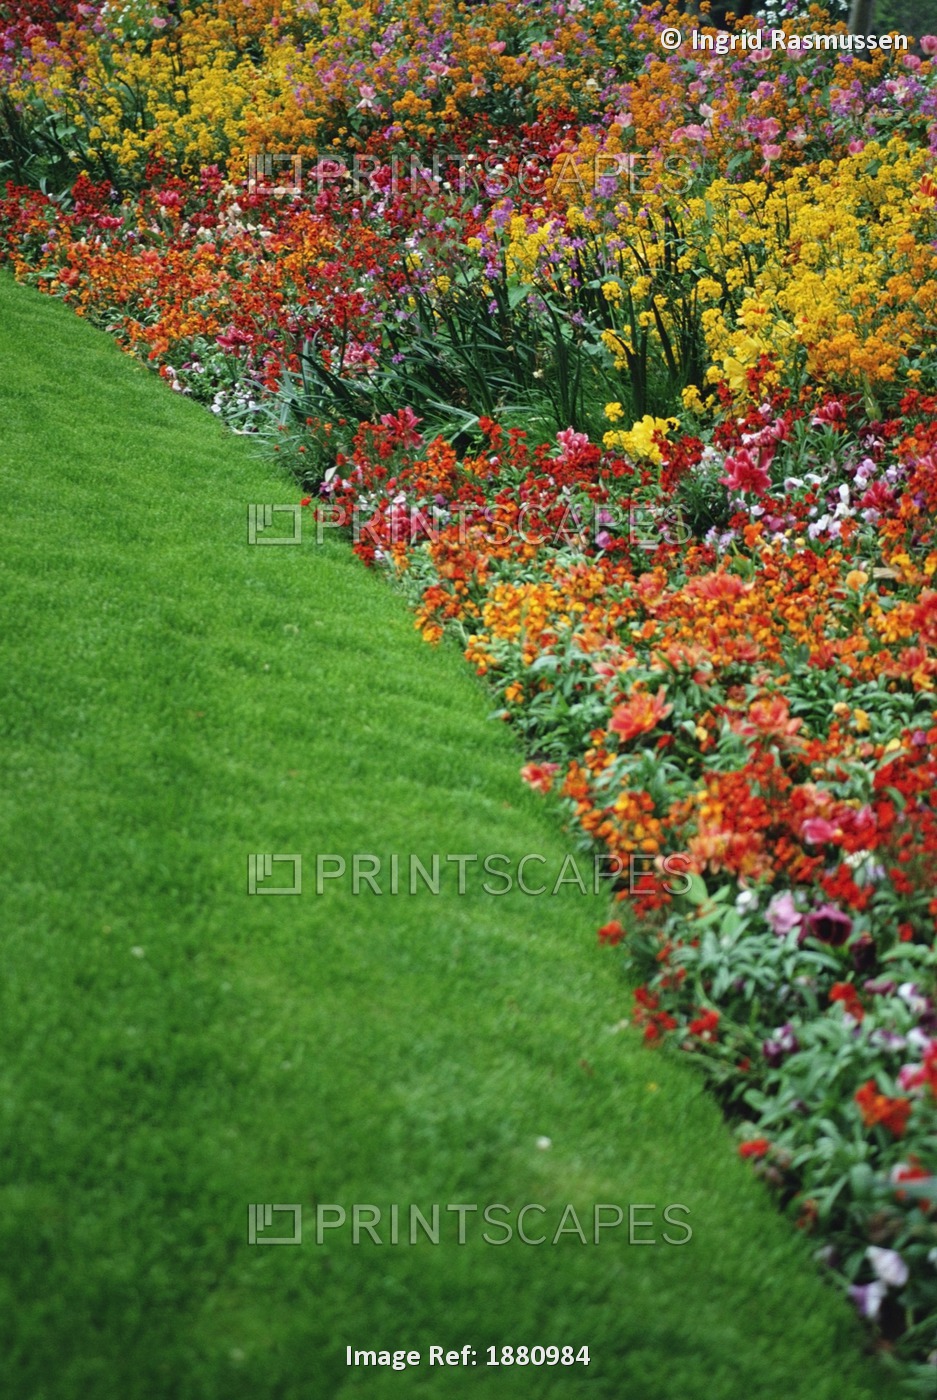 Colorful Flowers And Grass In Paris, Close-Up